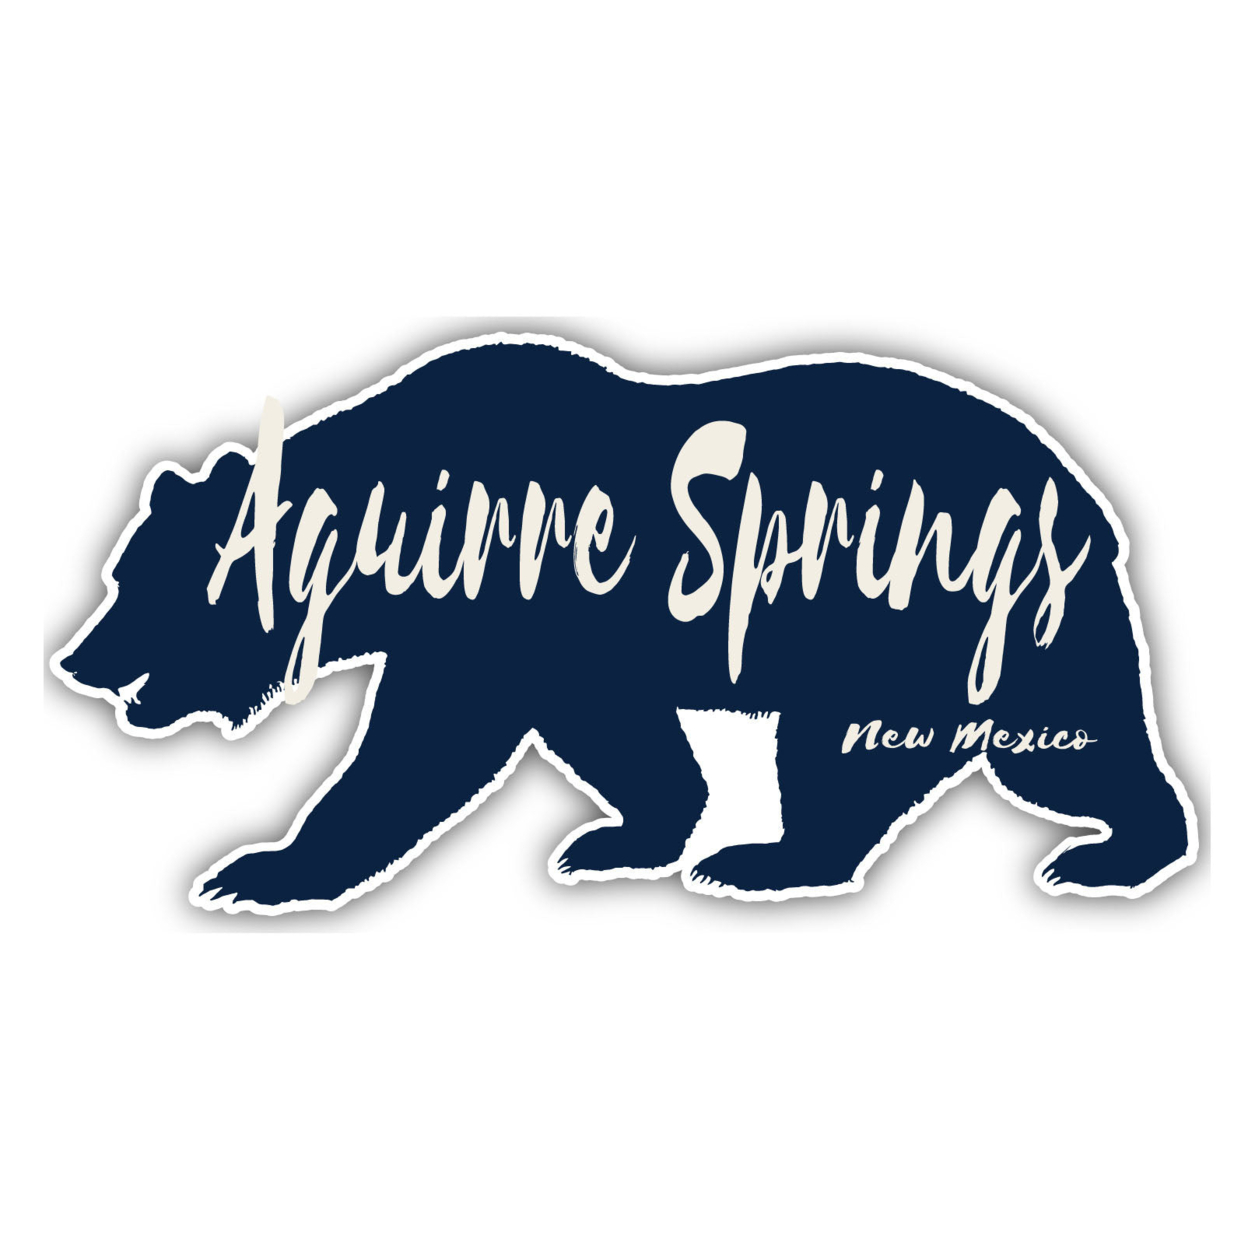 Aguirre Springs New Mexico Souvenir Decorative Stickers (Choose Theme And Size) - 4-Pack, 12-Inch, Bear